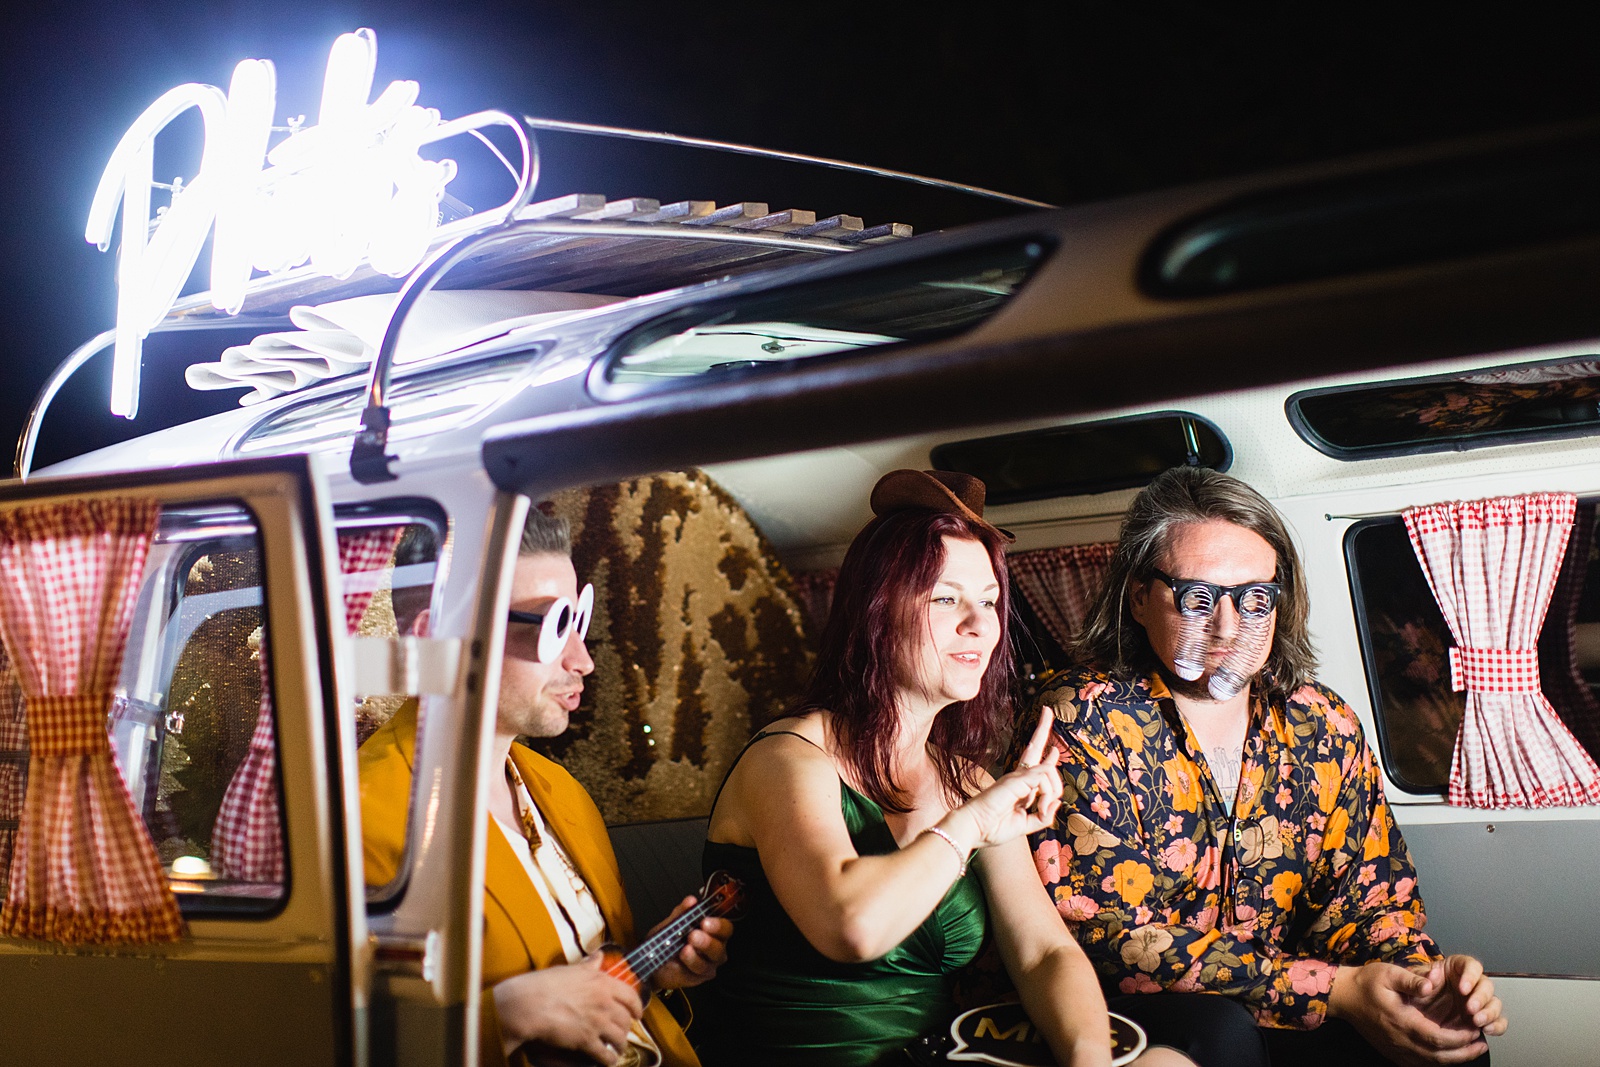 Groom and guests take photos in retro VW Bus photo booth at Mountain Shadows Resort wedding reception by Paradise Valley wedding photographer PMA Photography